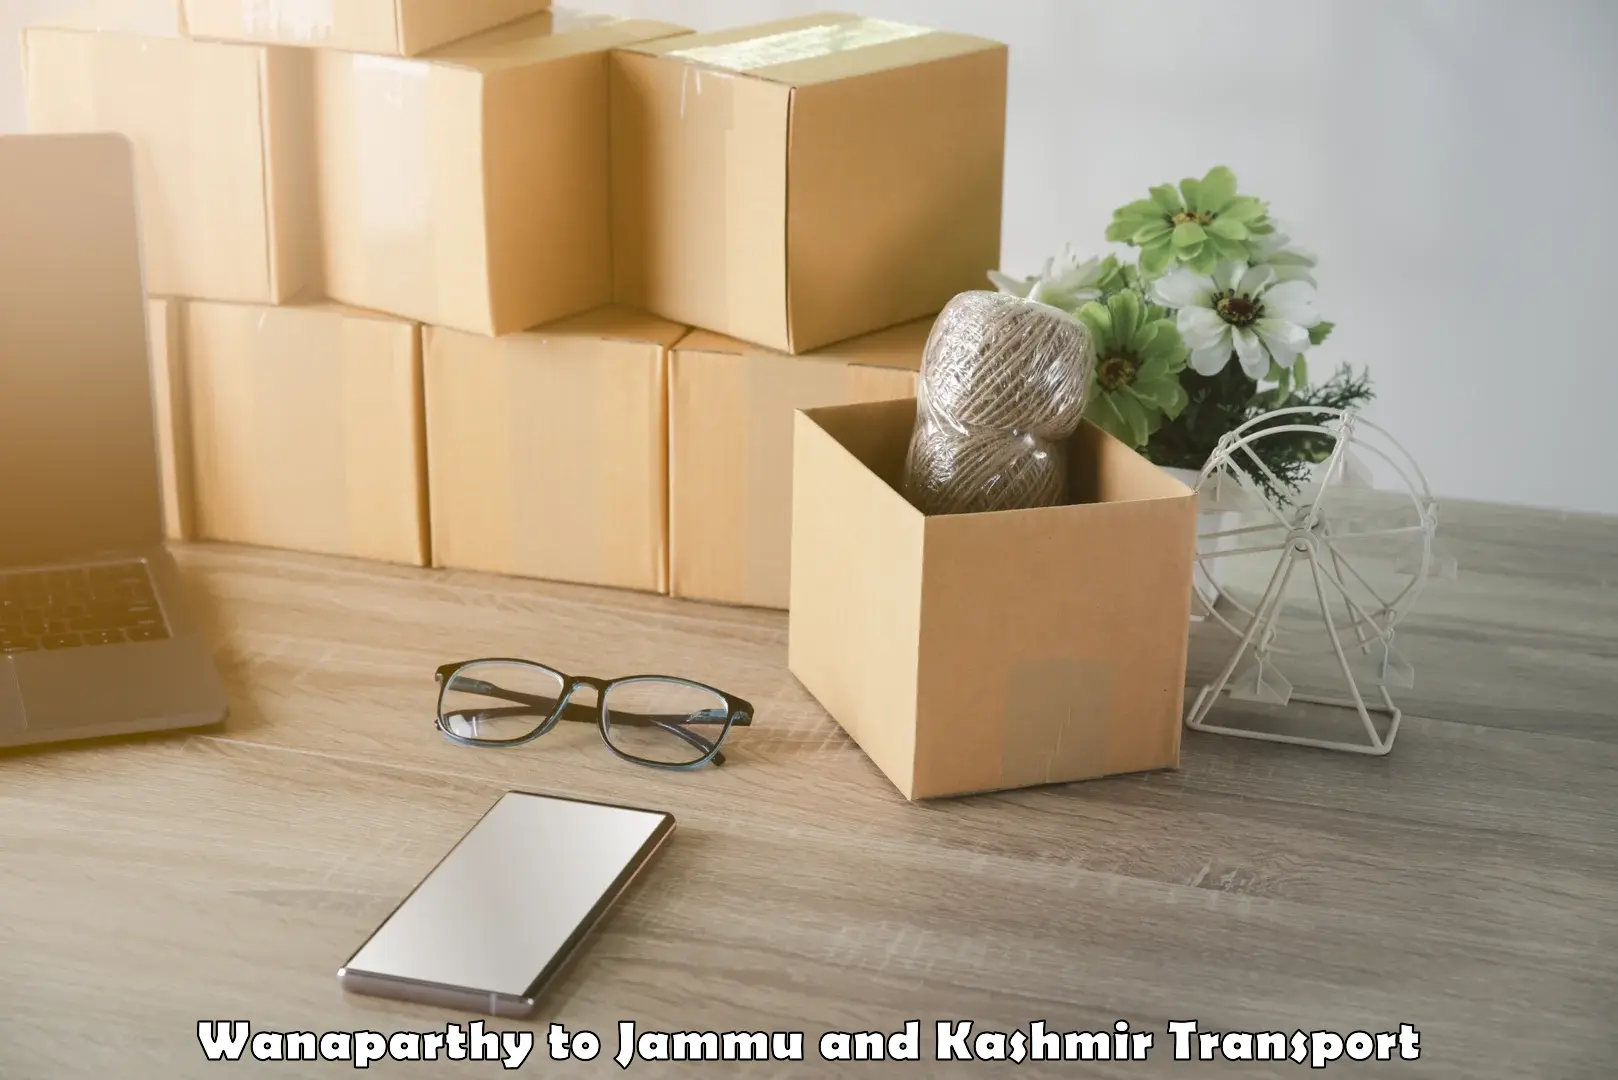 Express transport services in Wanaparthy to Jammu